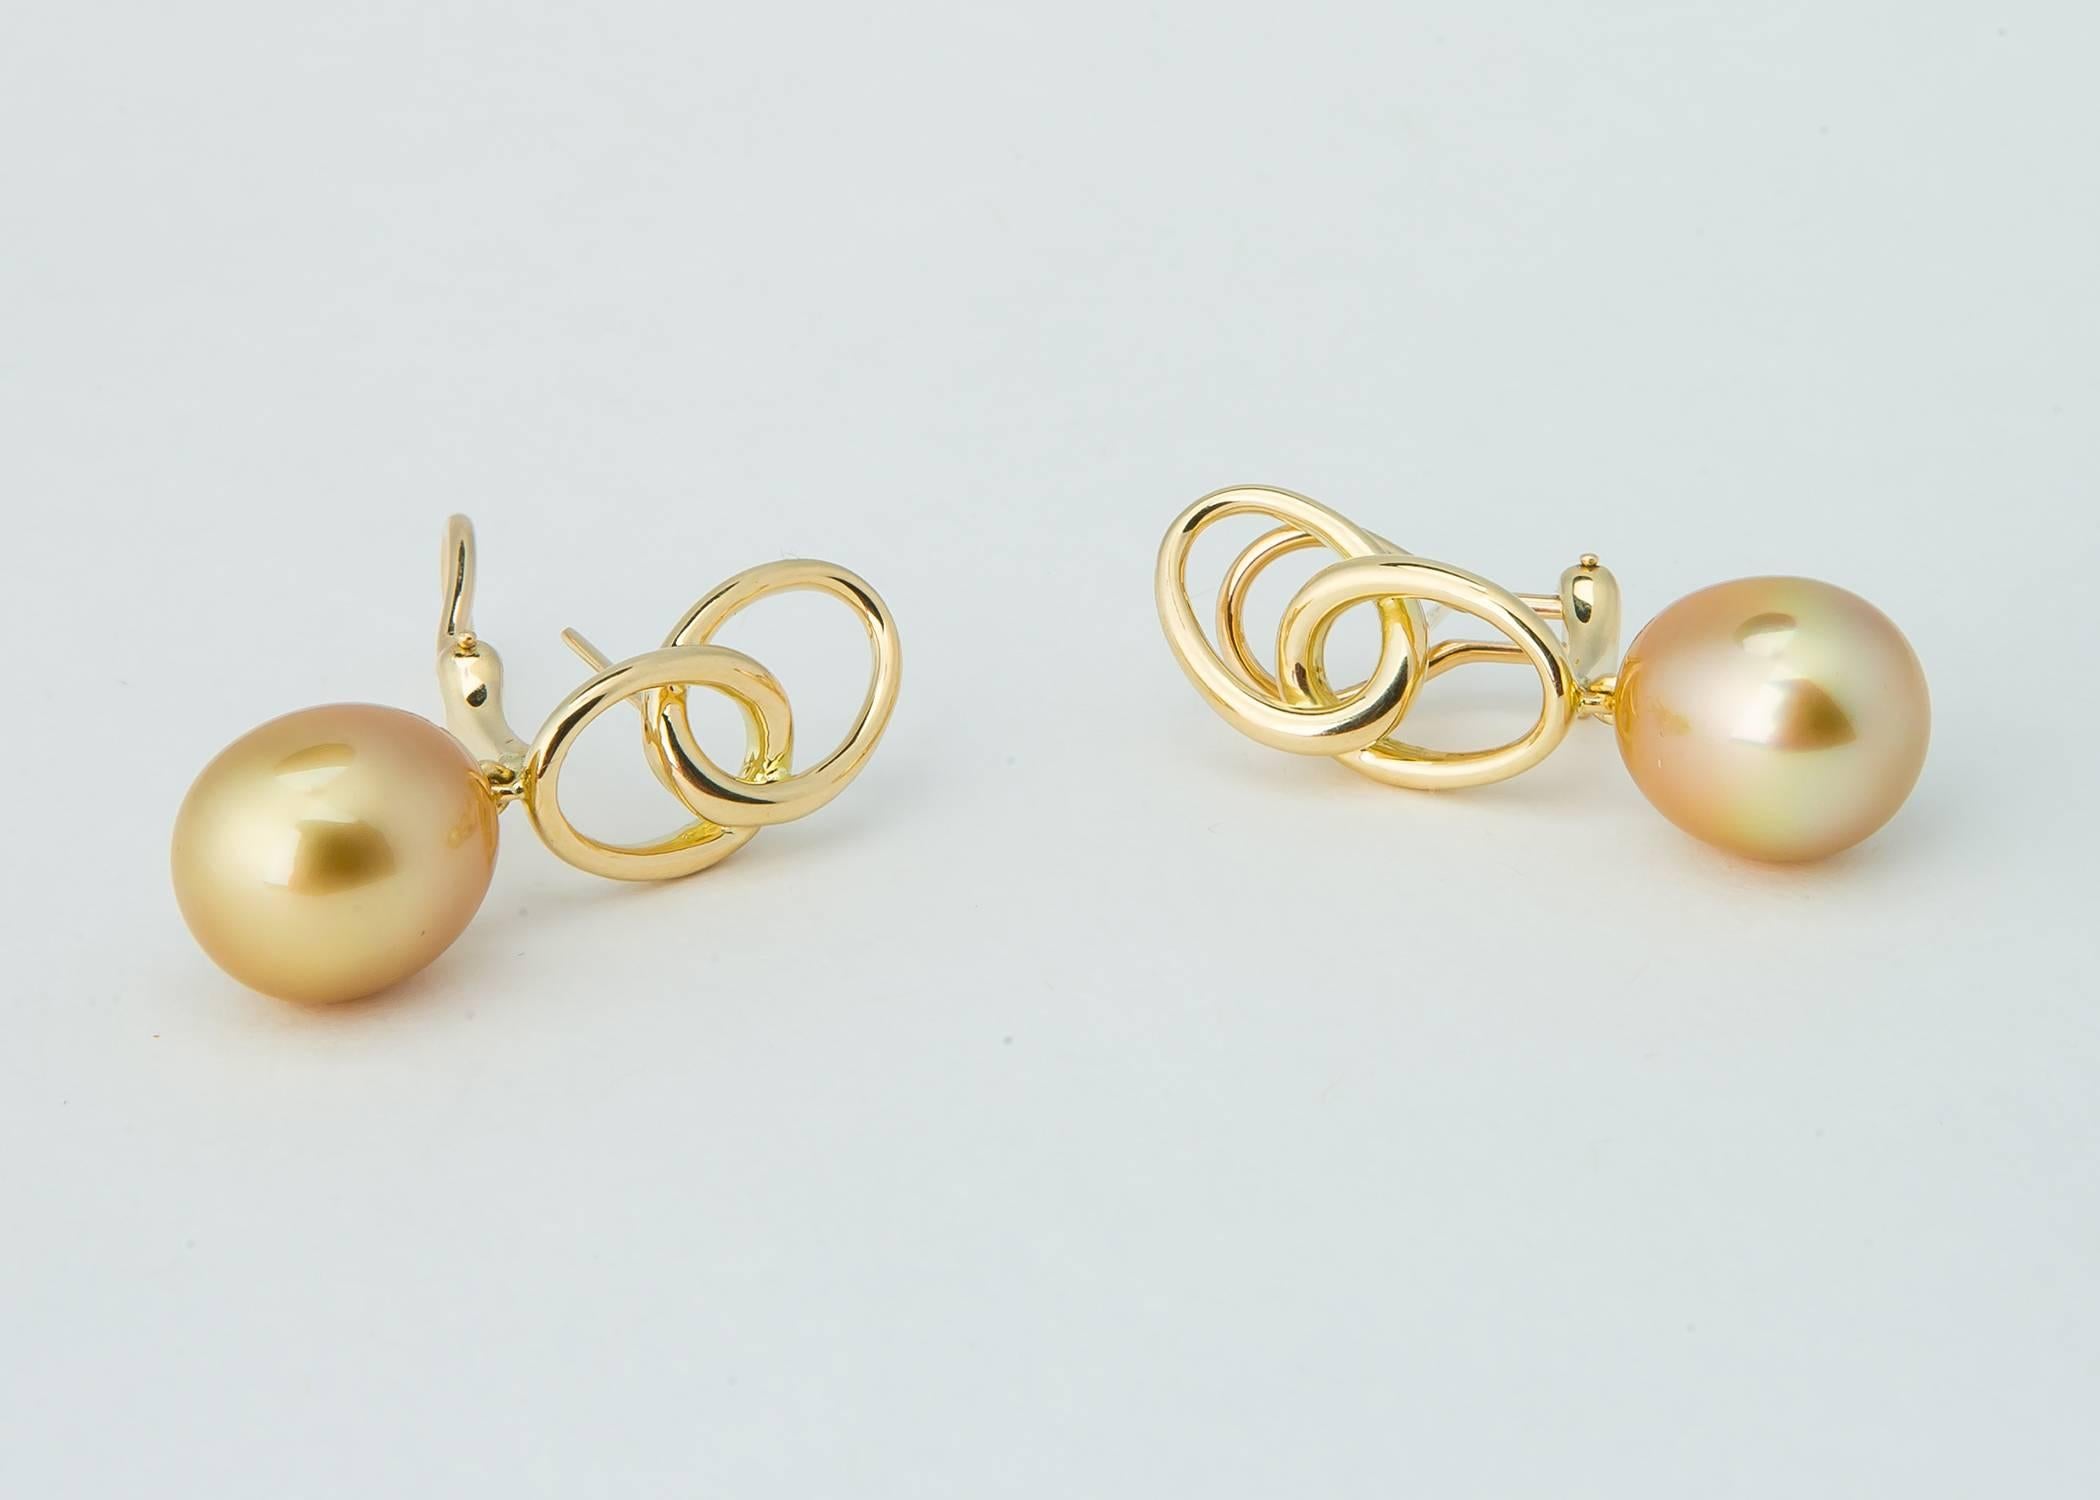 Elsa Peretti has always proven less is more. Rich golden south sea pearls are suspended below elegant geometric loops. Simply Chic.  The pearls measure 13.2 x 11.8 mm and the total earring length is 1 3/8's inches. 